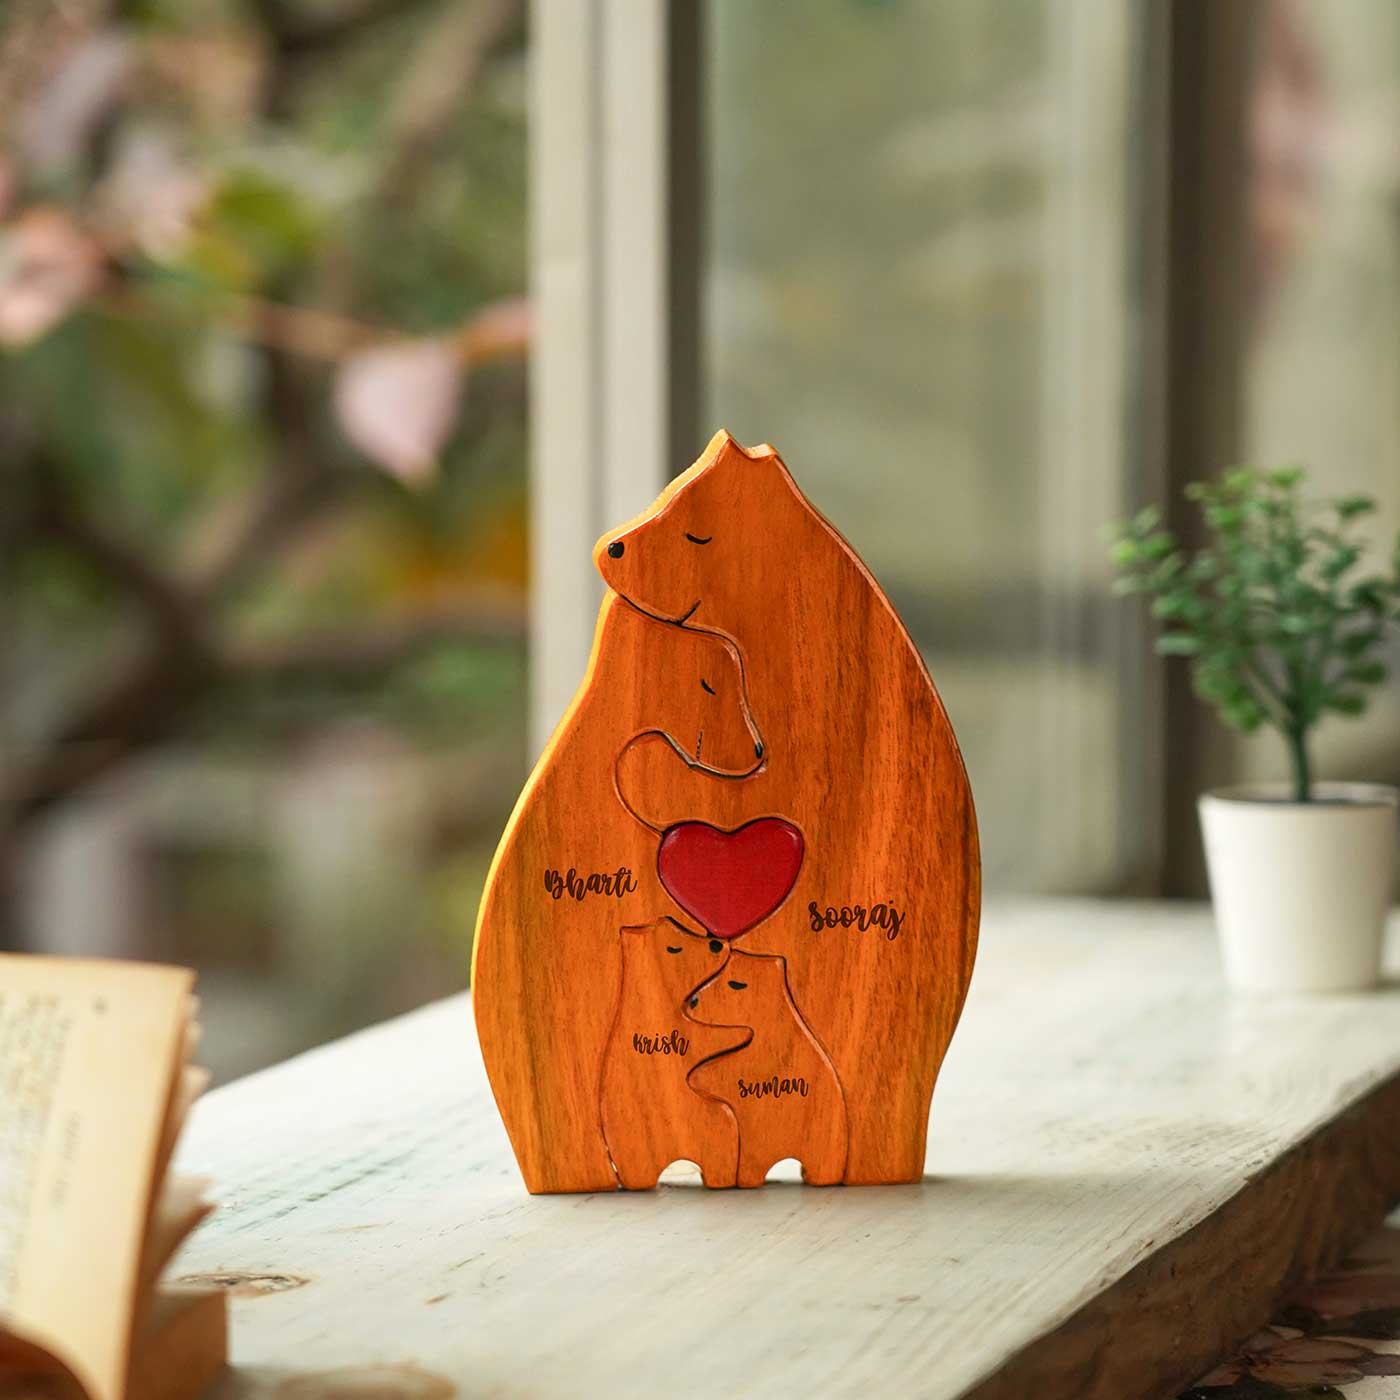 Woodgeek Store | Personalized Engraved Gifts | Handmade Wooden Gifts